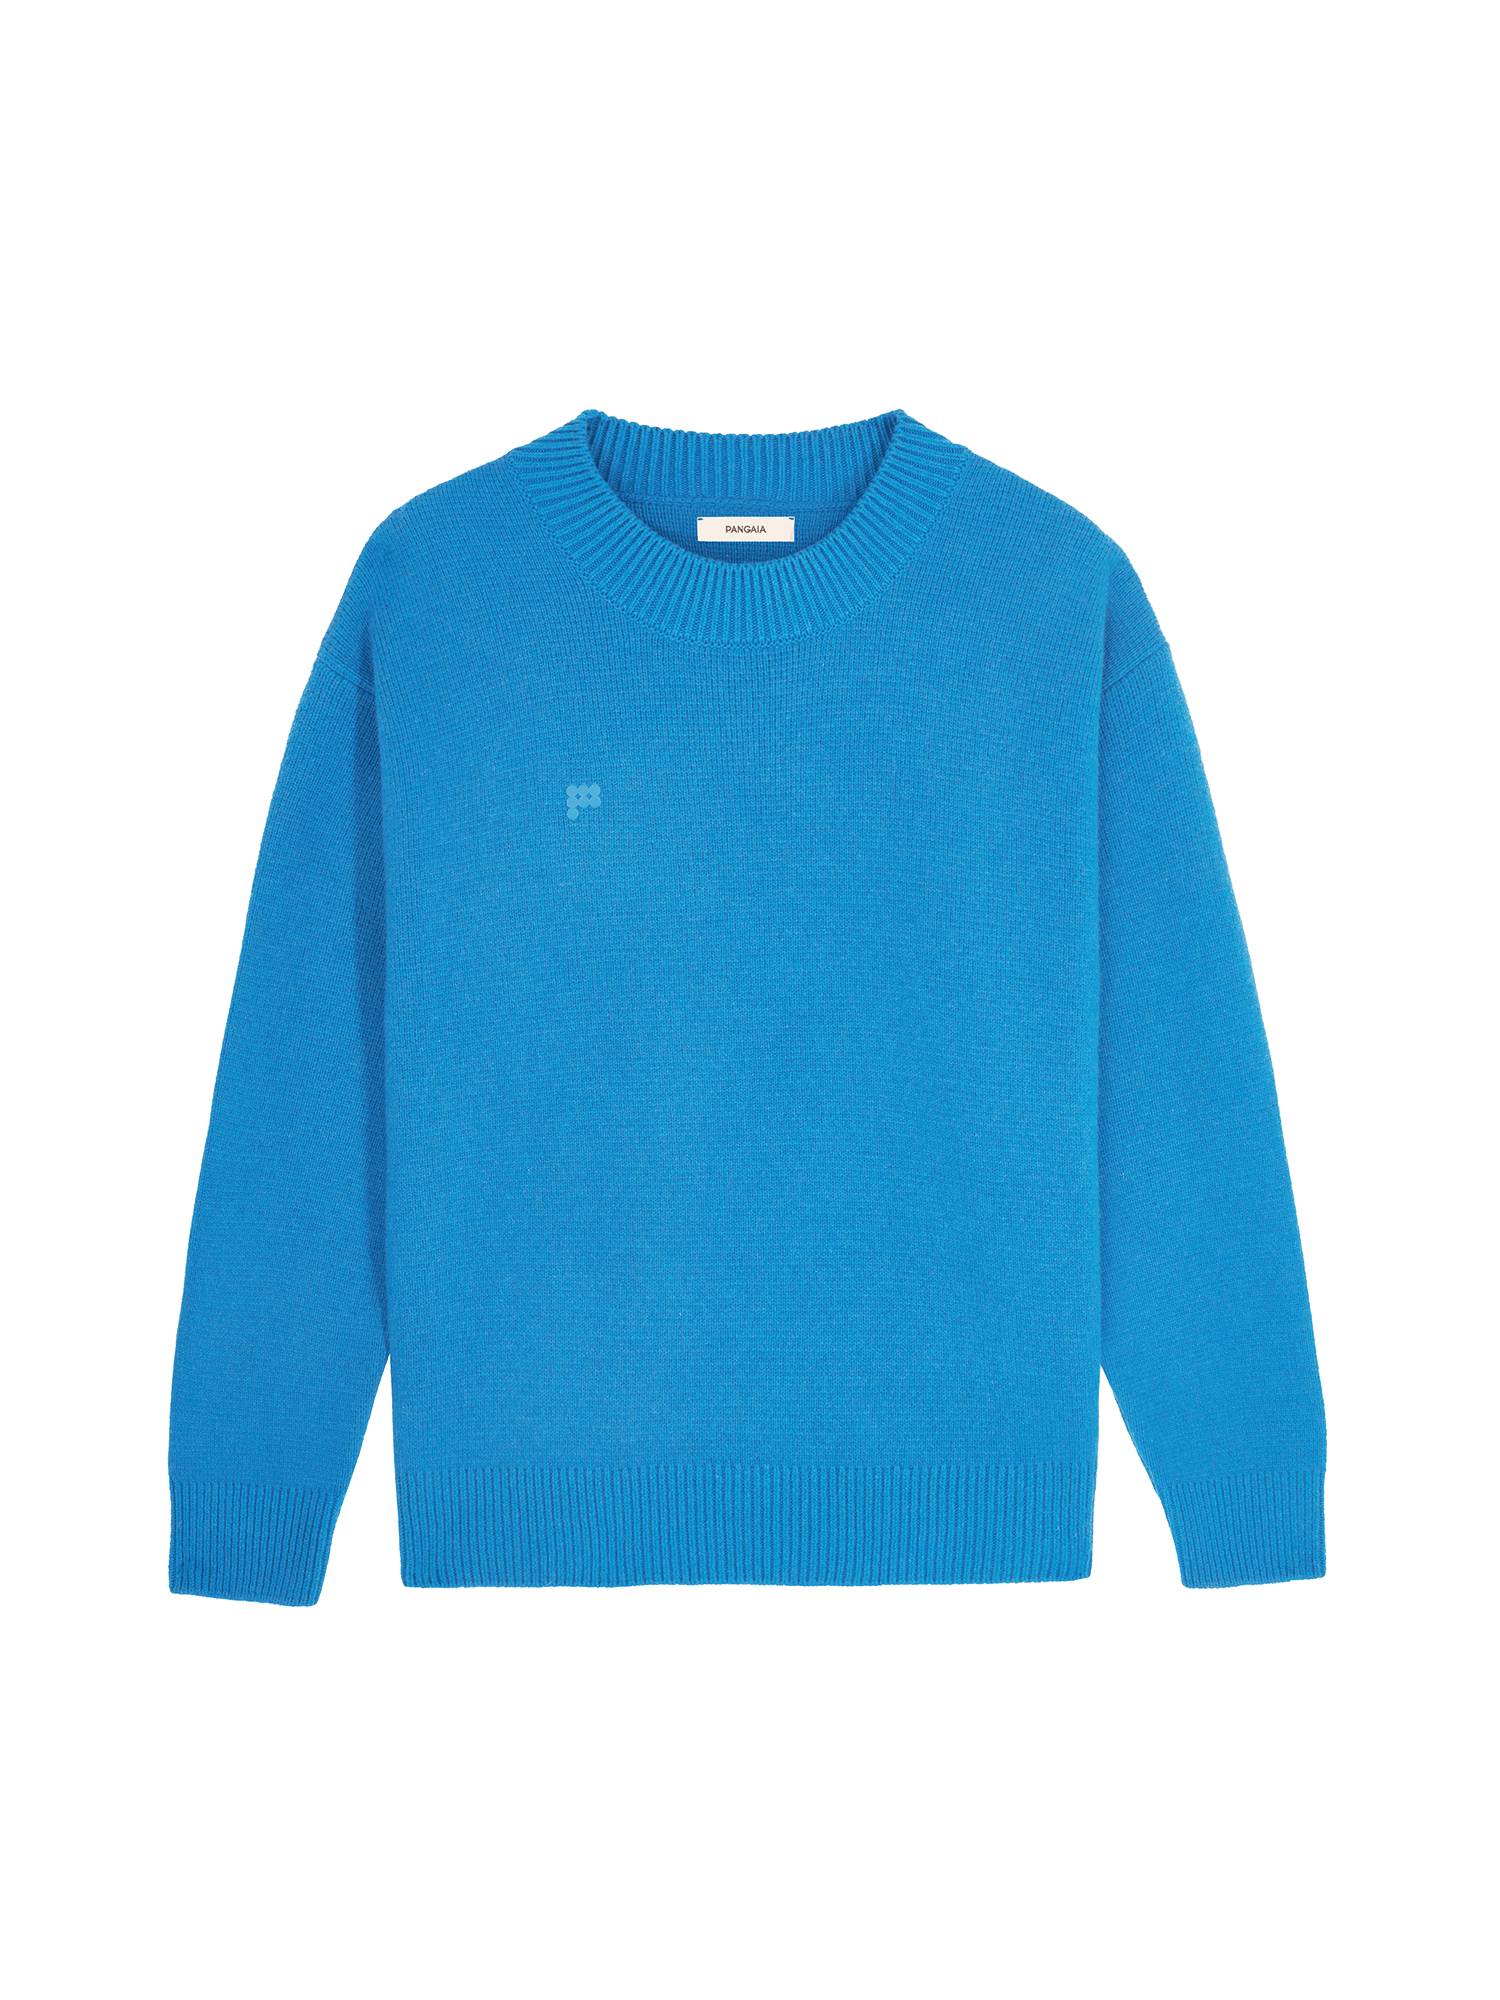 Recycled_Cashmere_Knit_Crew_NeckSweater_Cerulean_Blue-packshot-4